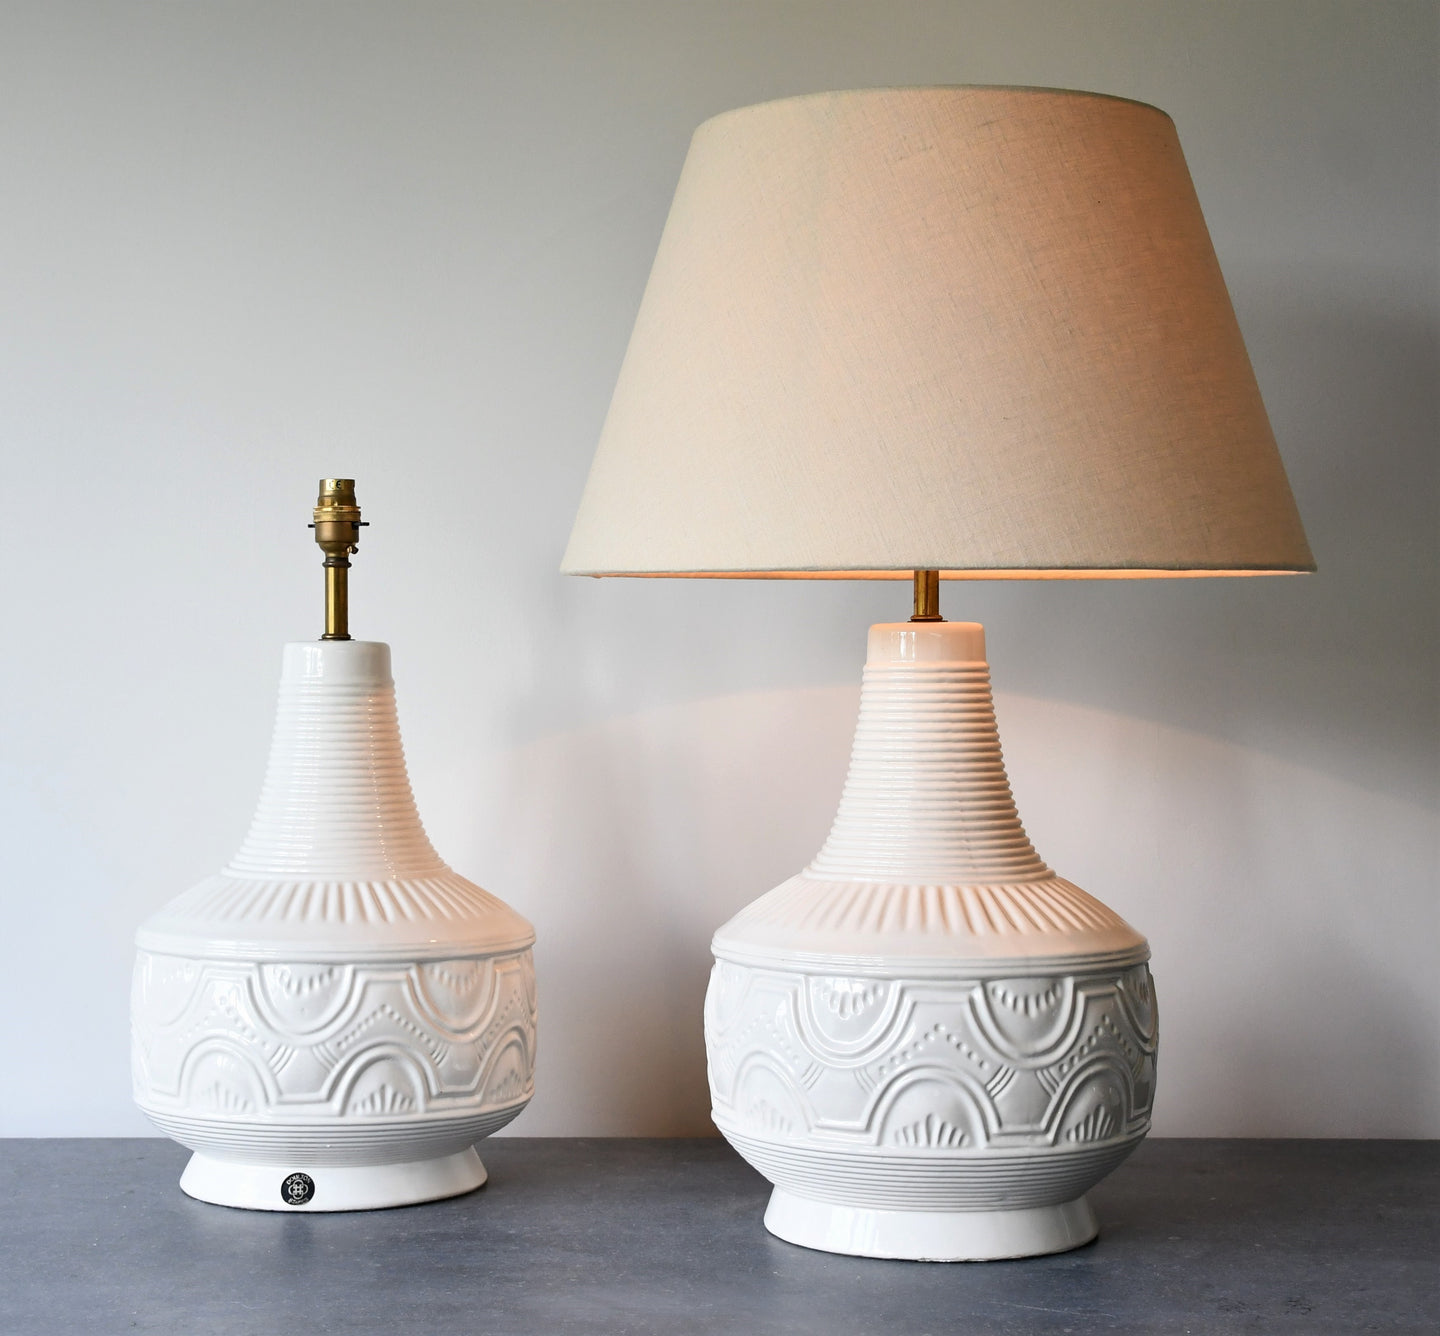 A Pair of Mid 20th Century - Royal Doulton Table Lamps